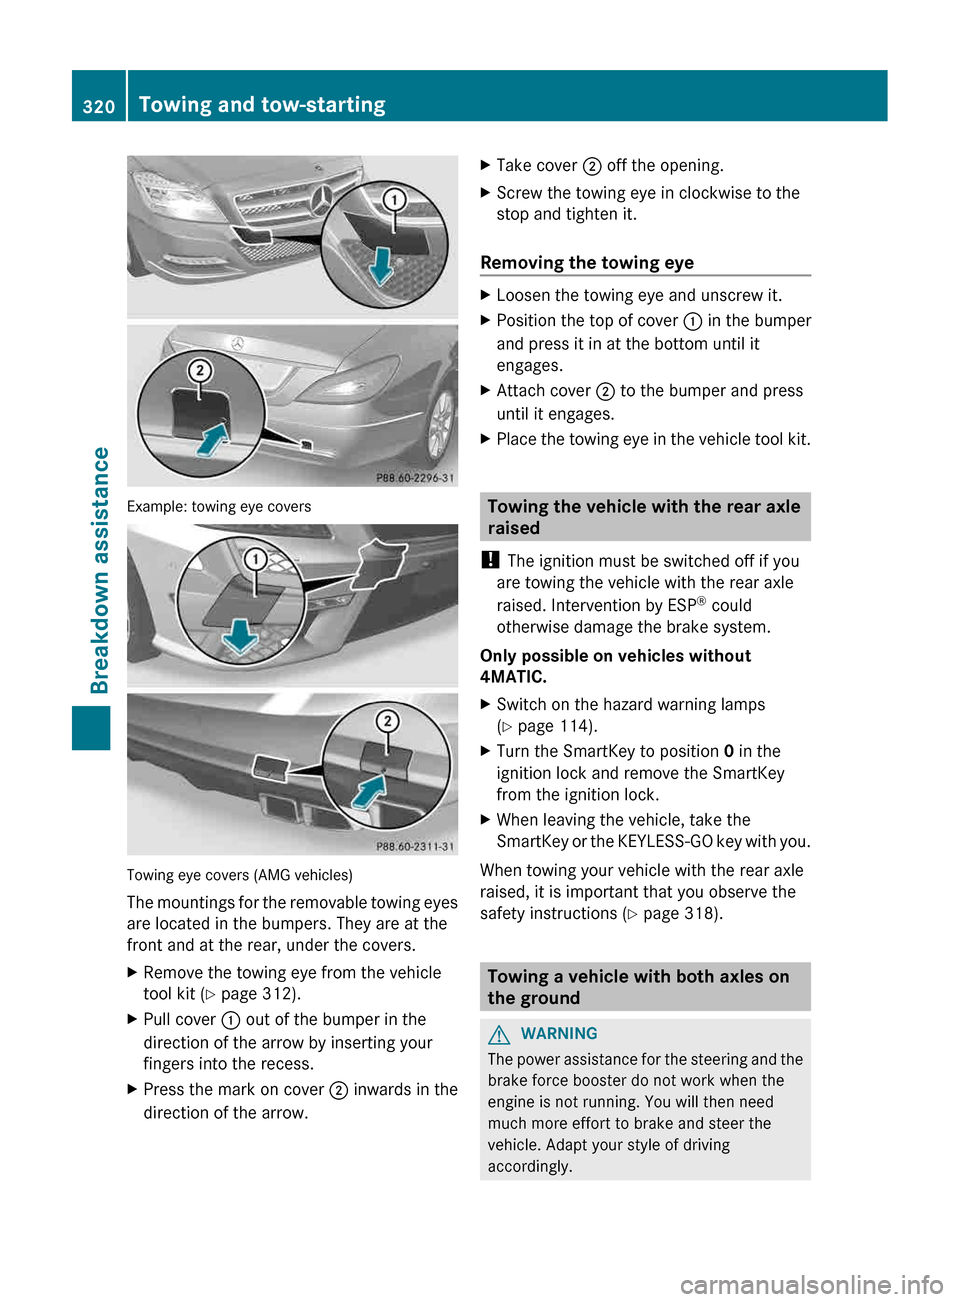 MERCEDES-BENZ CLS-Class 2013 W218 Owners Manual Example: towing eye covers
Towing eye covers (AMG vehicles)
The 
mountings for the removable towing eyes
are located in the bumpers. They are at the
front and at the rear, under the covers.
X Remove t